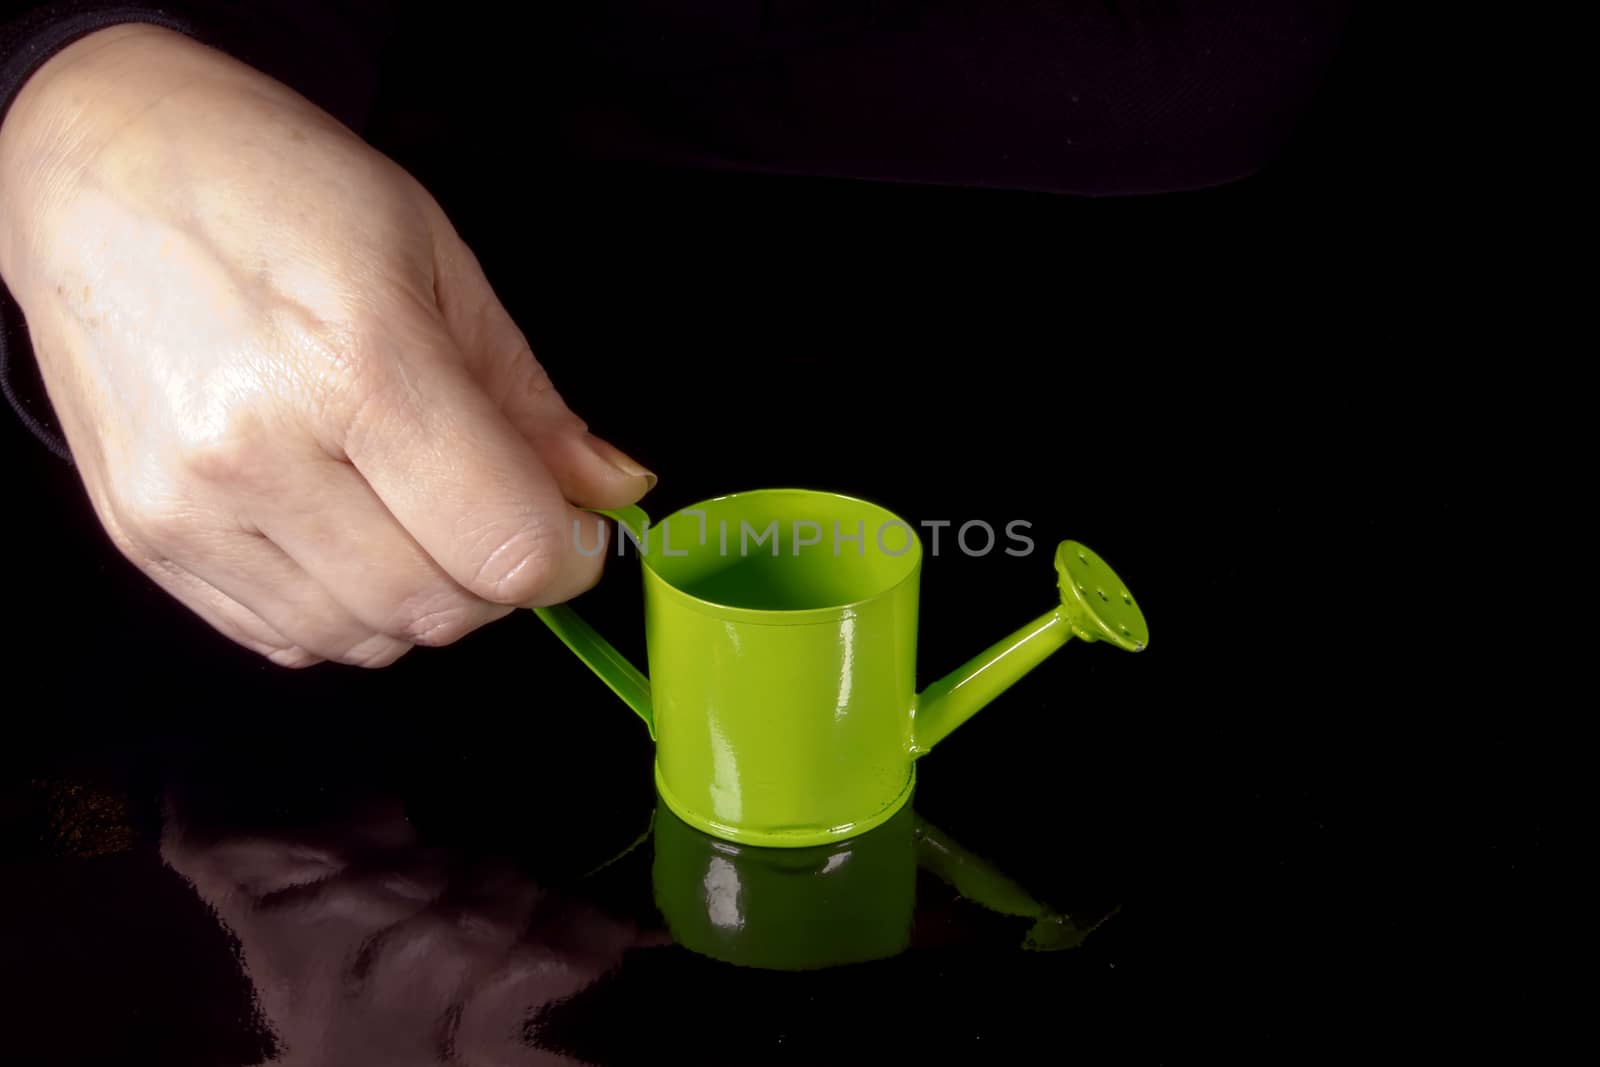 Female hand holding a watering can in front of a chalkboard